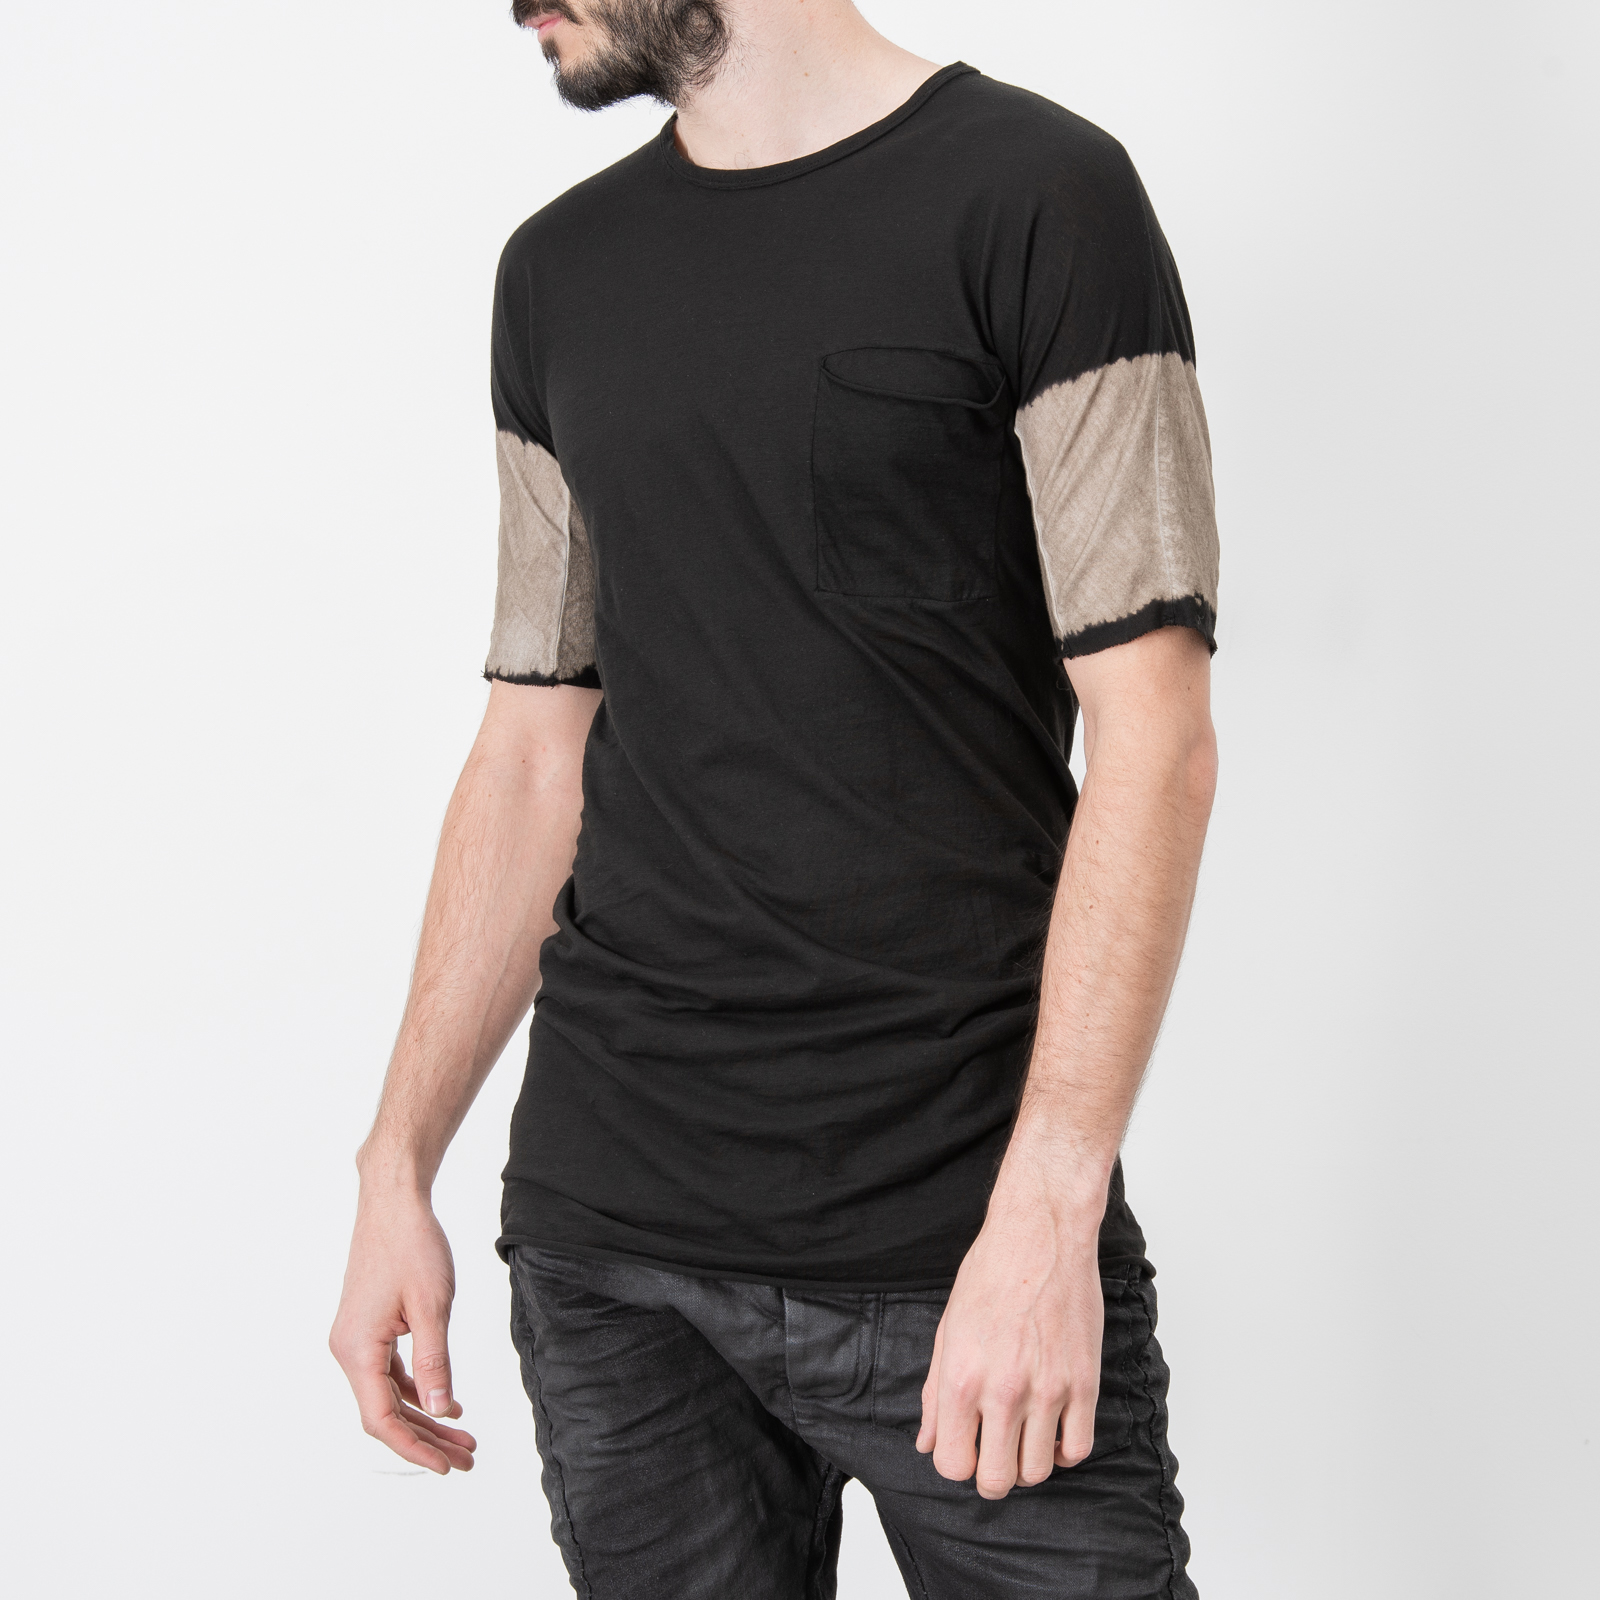 BLACK BLEACHED BAND T SHIRT|wolfensson